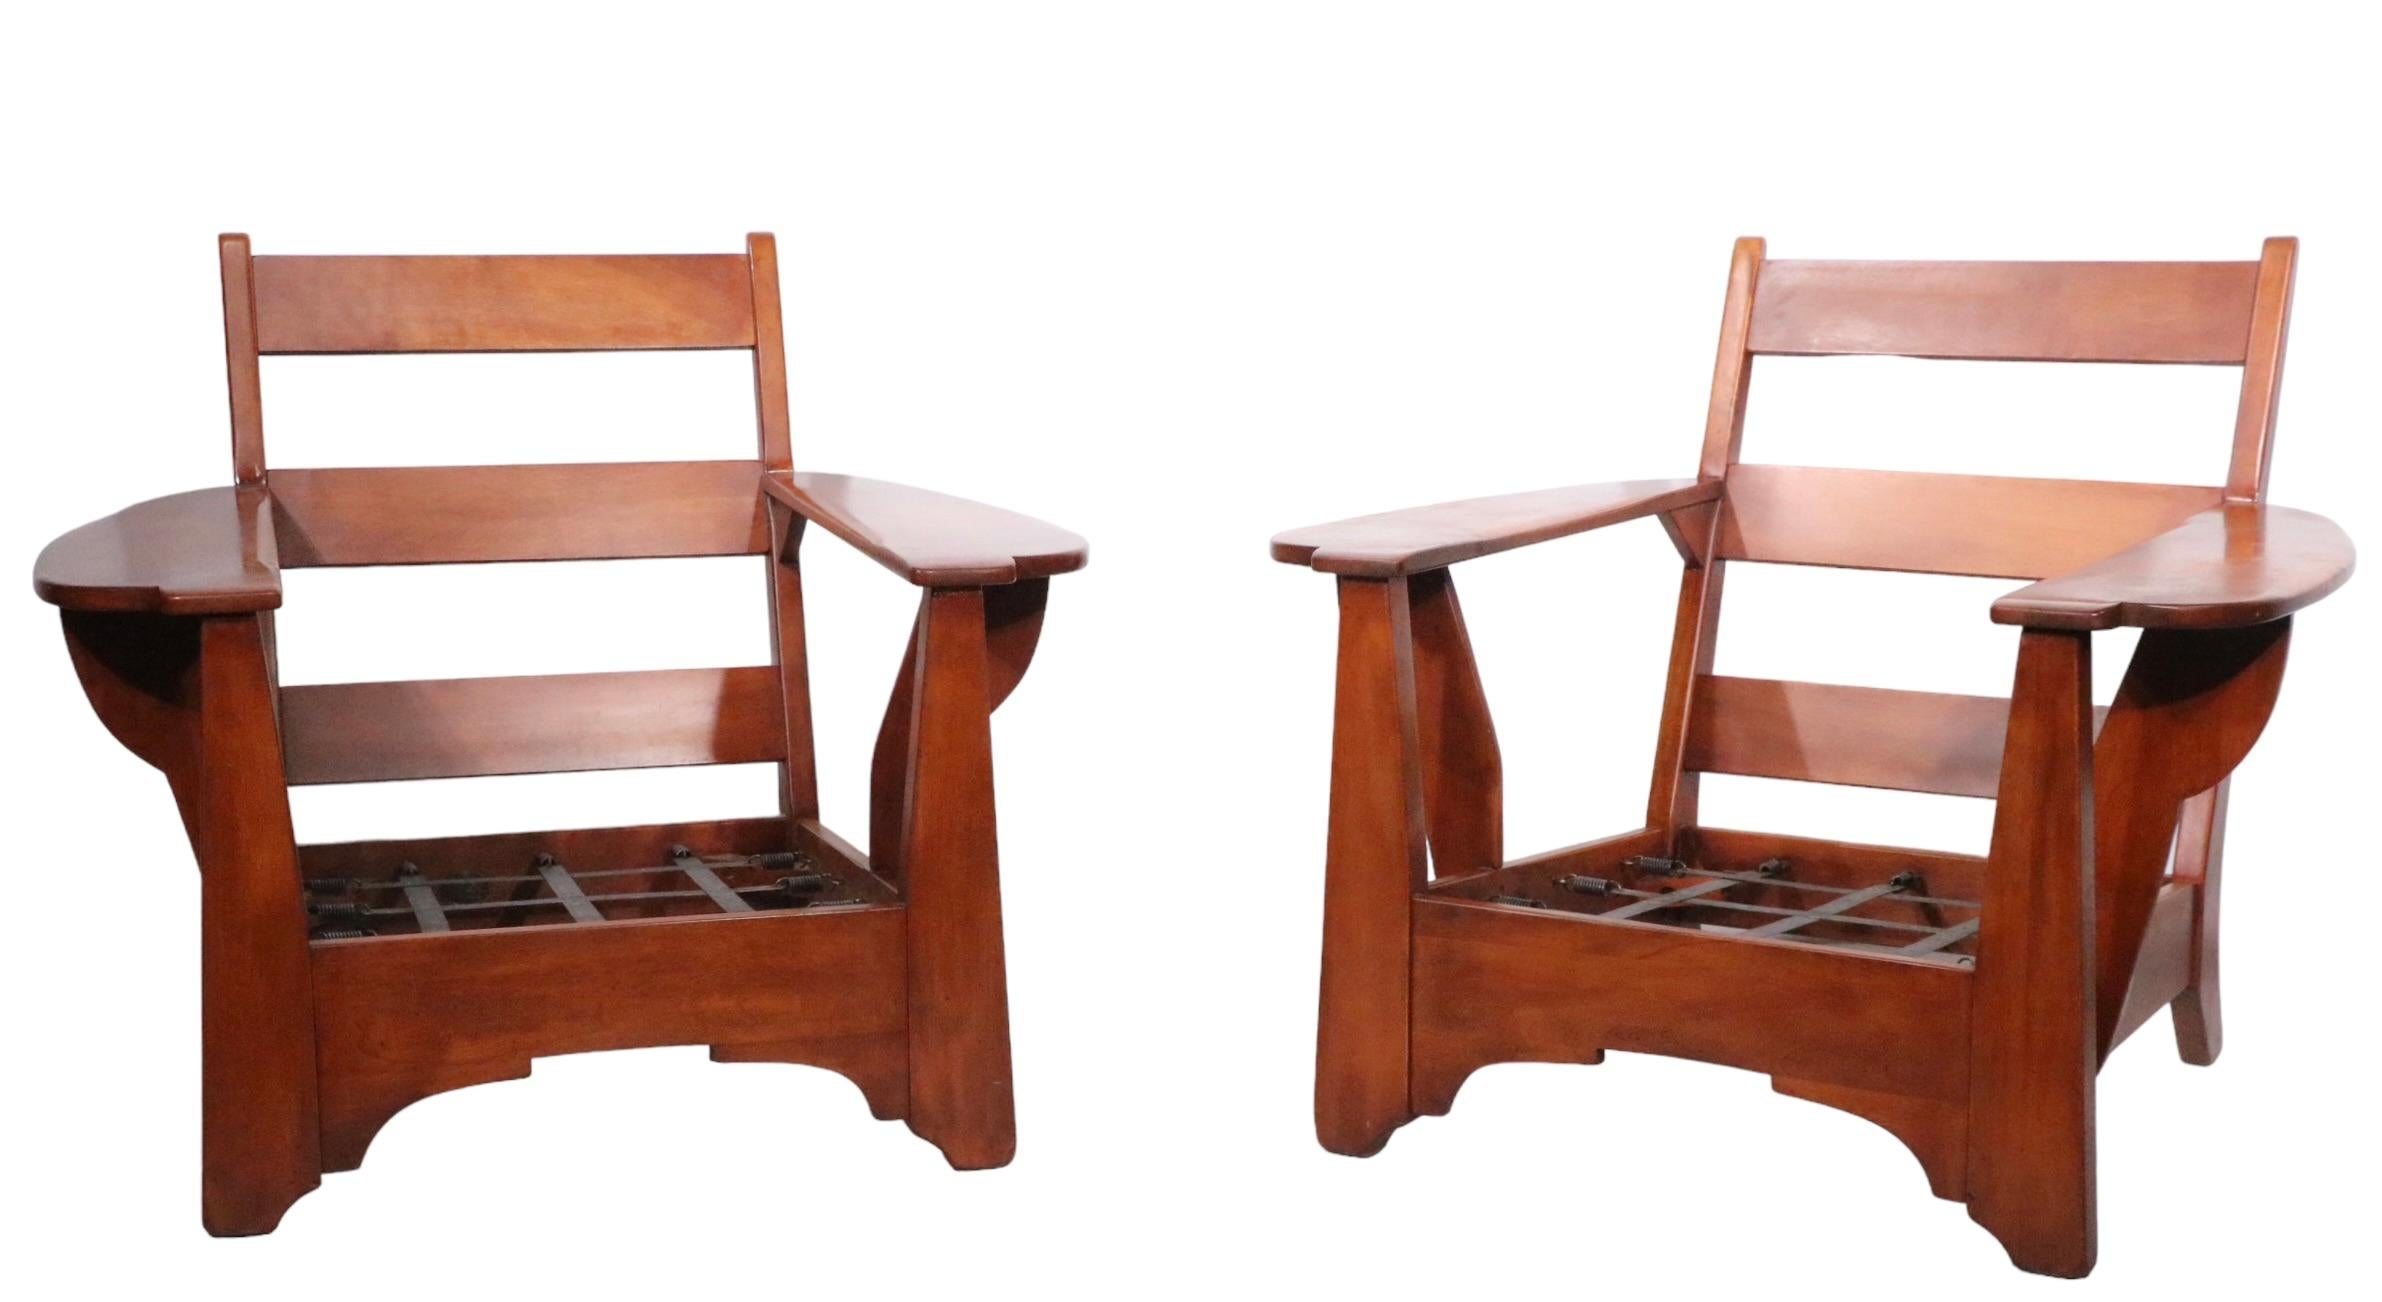 Pr. Paddle Arm Lounge Chairs by Herman de Vries for Cushman Colonial, c 1940-50s 6